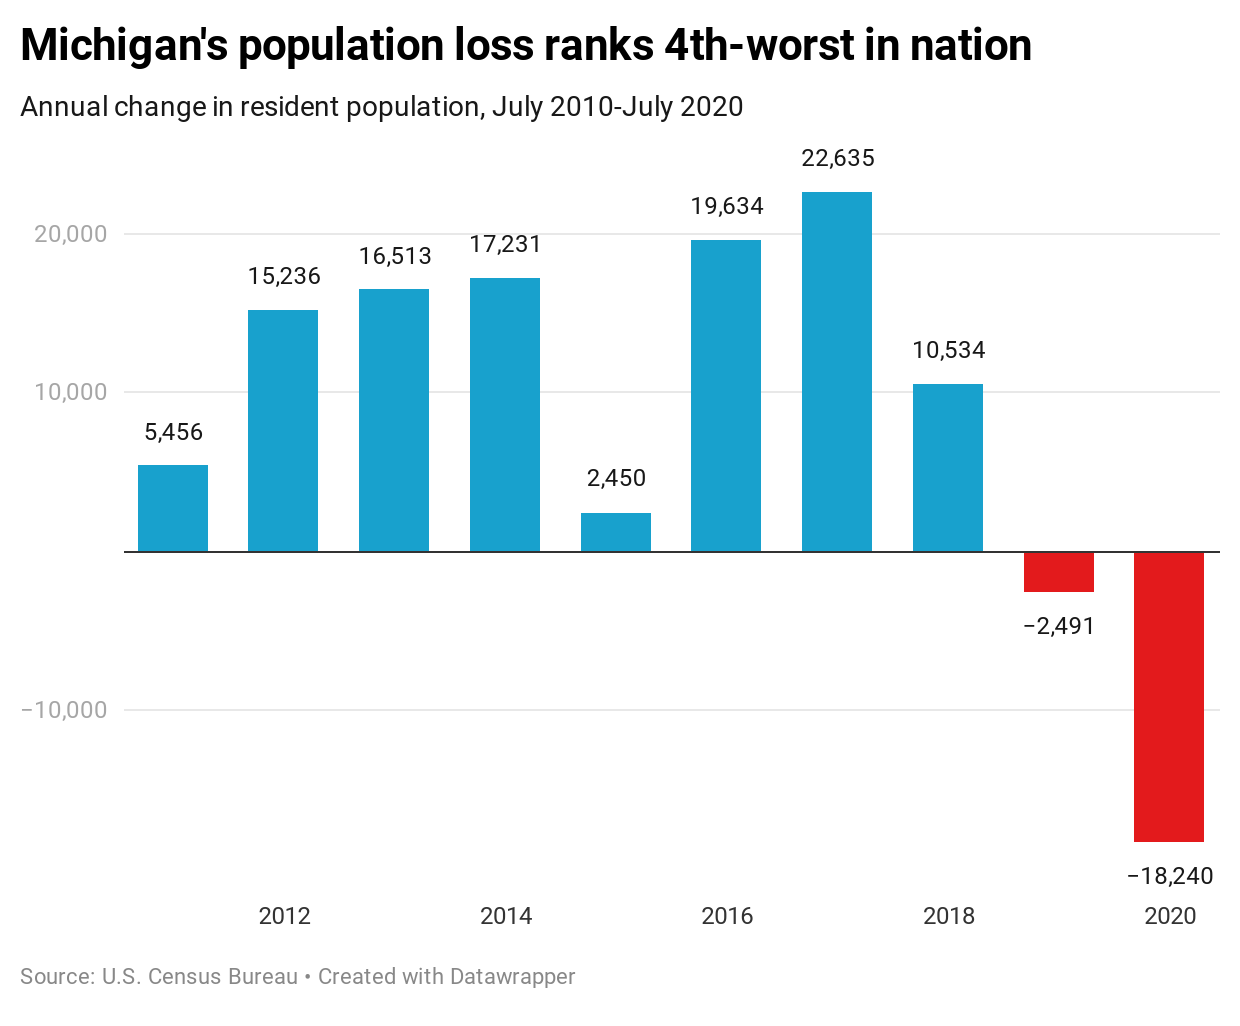 Michigan's population loss ranks 4th-worst in nation